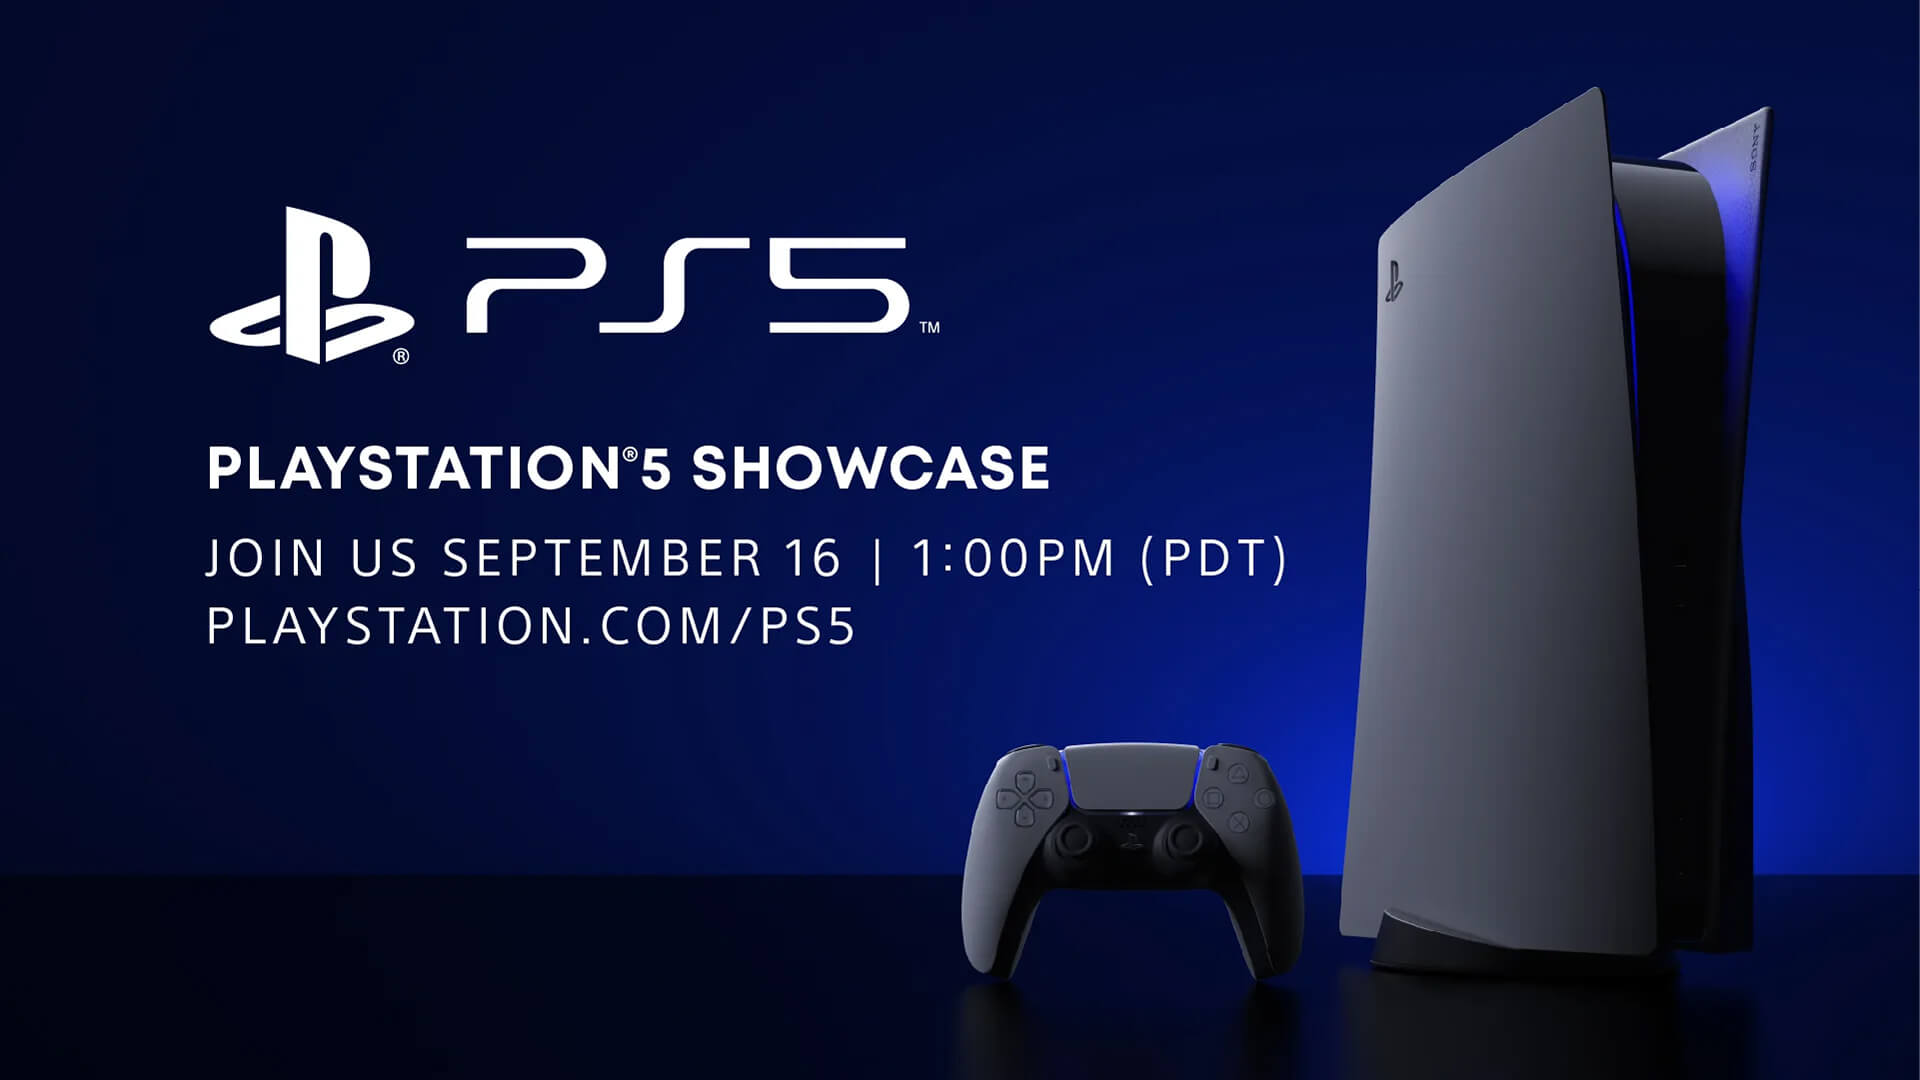 PlayStation Showcase: 5 best game reveals from PS5 and PSVR 2